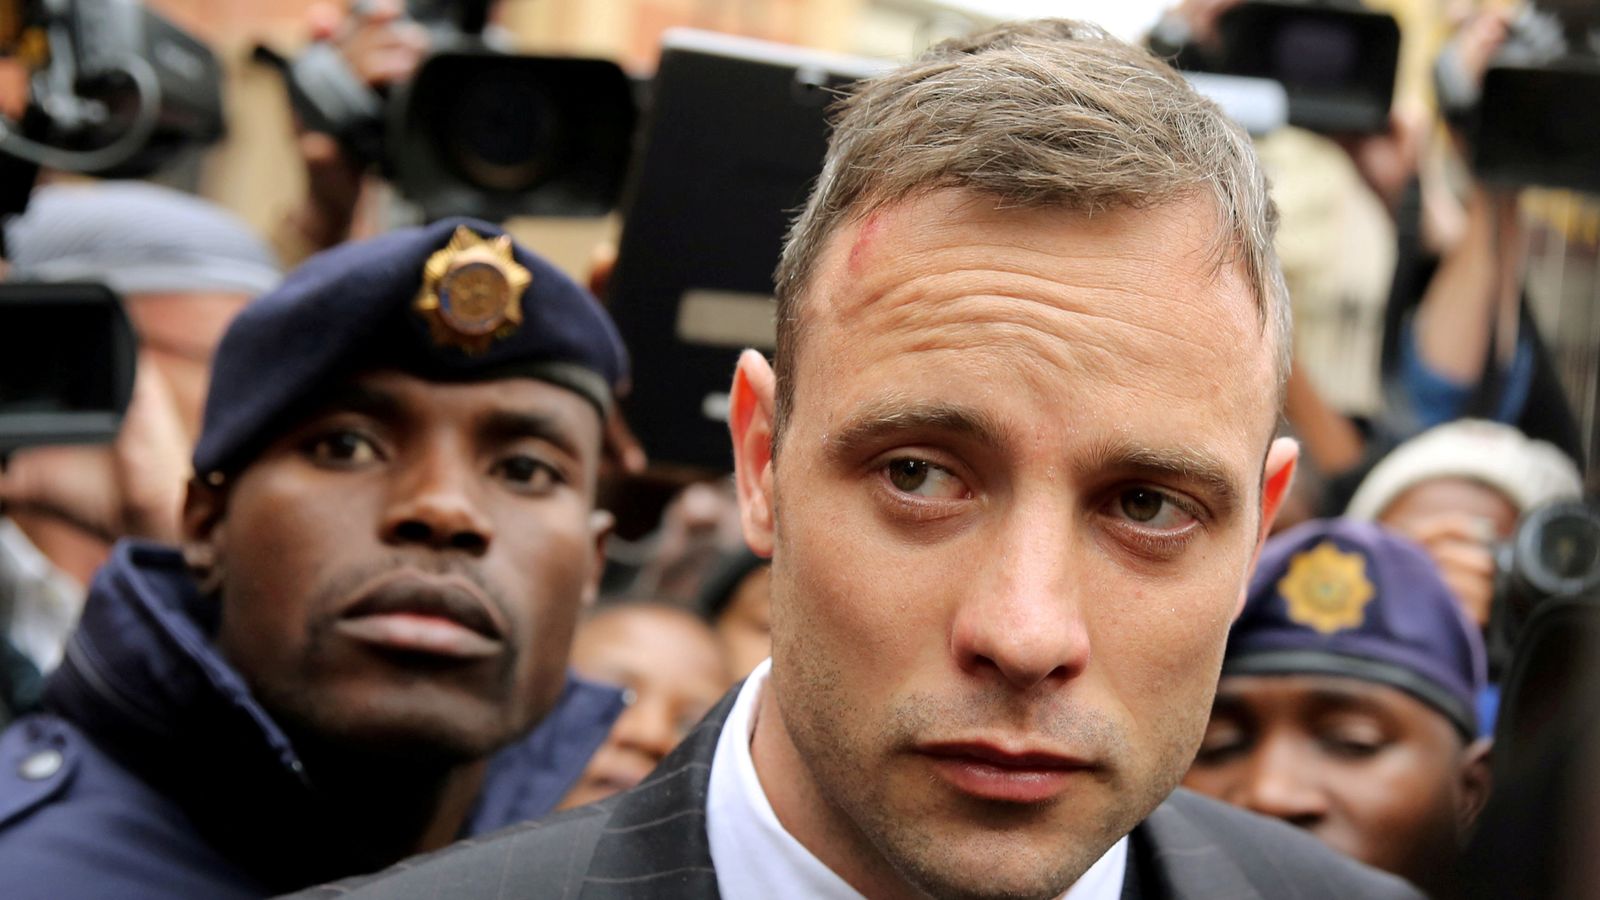 Who is Oscar Pistorius? From 'blade runner' to convicted murderer